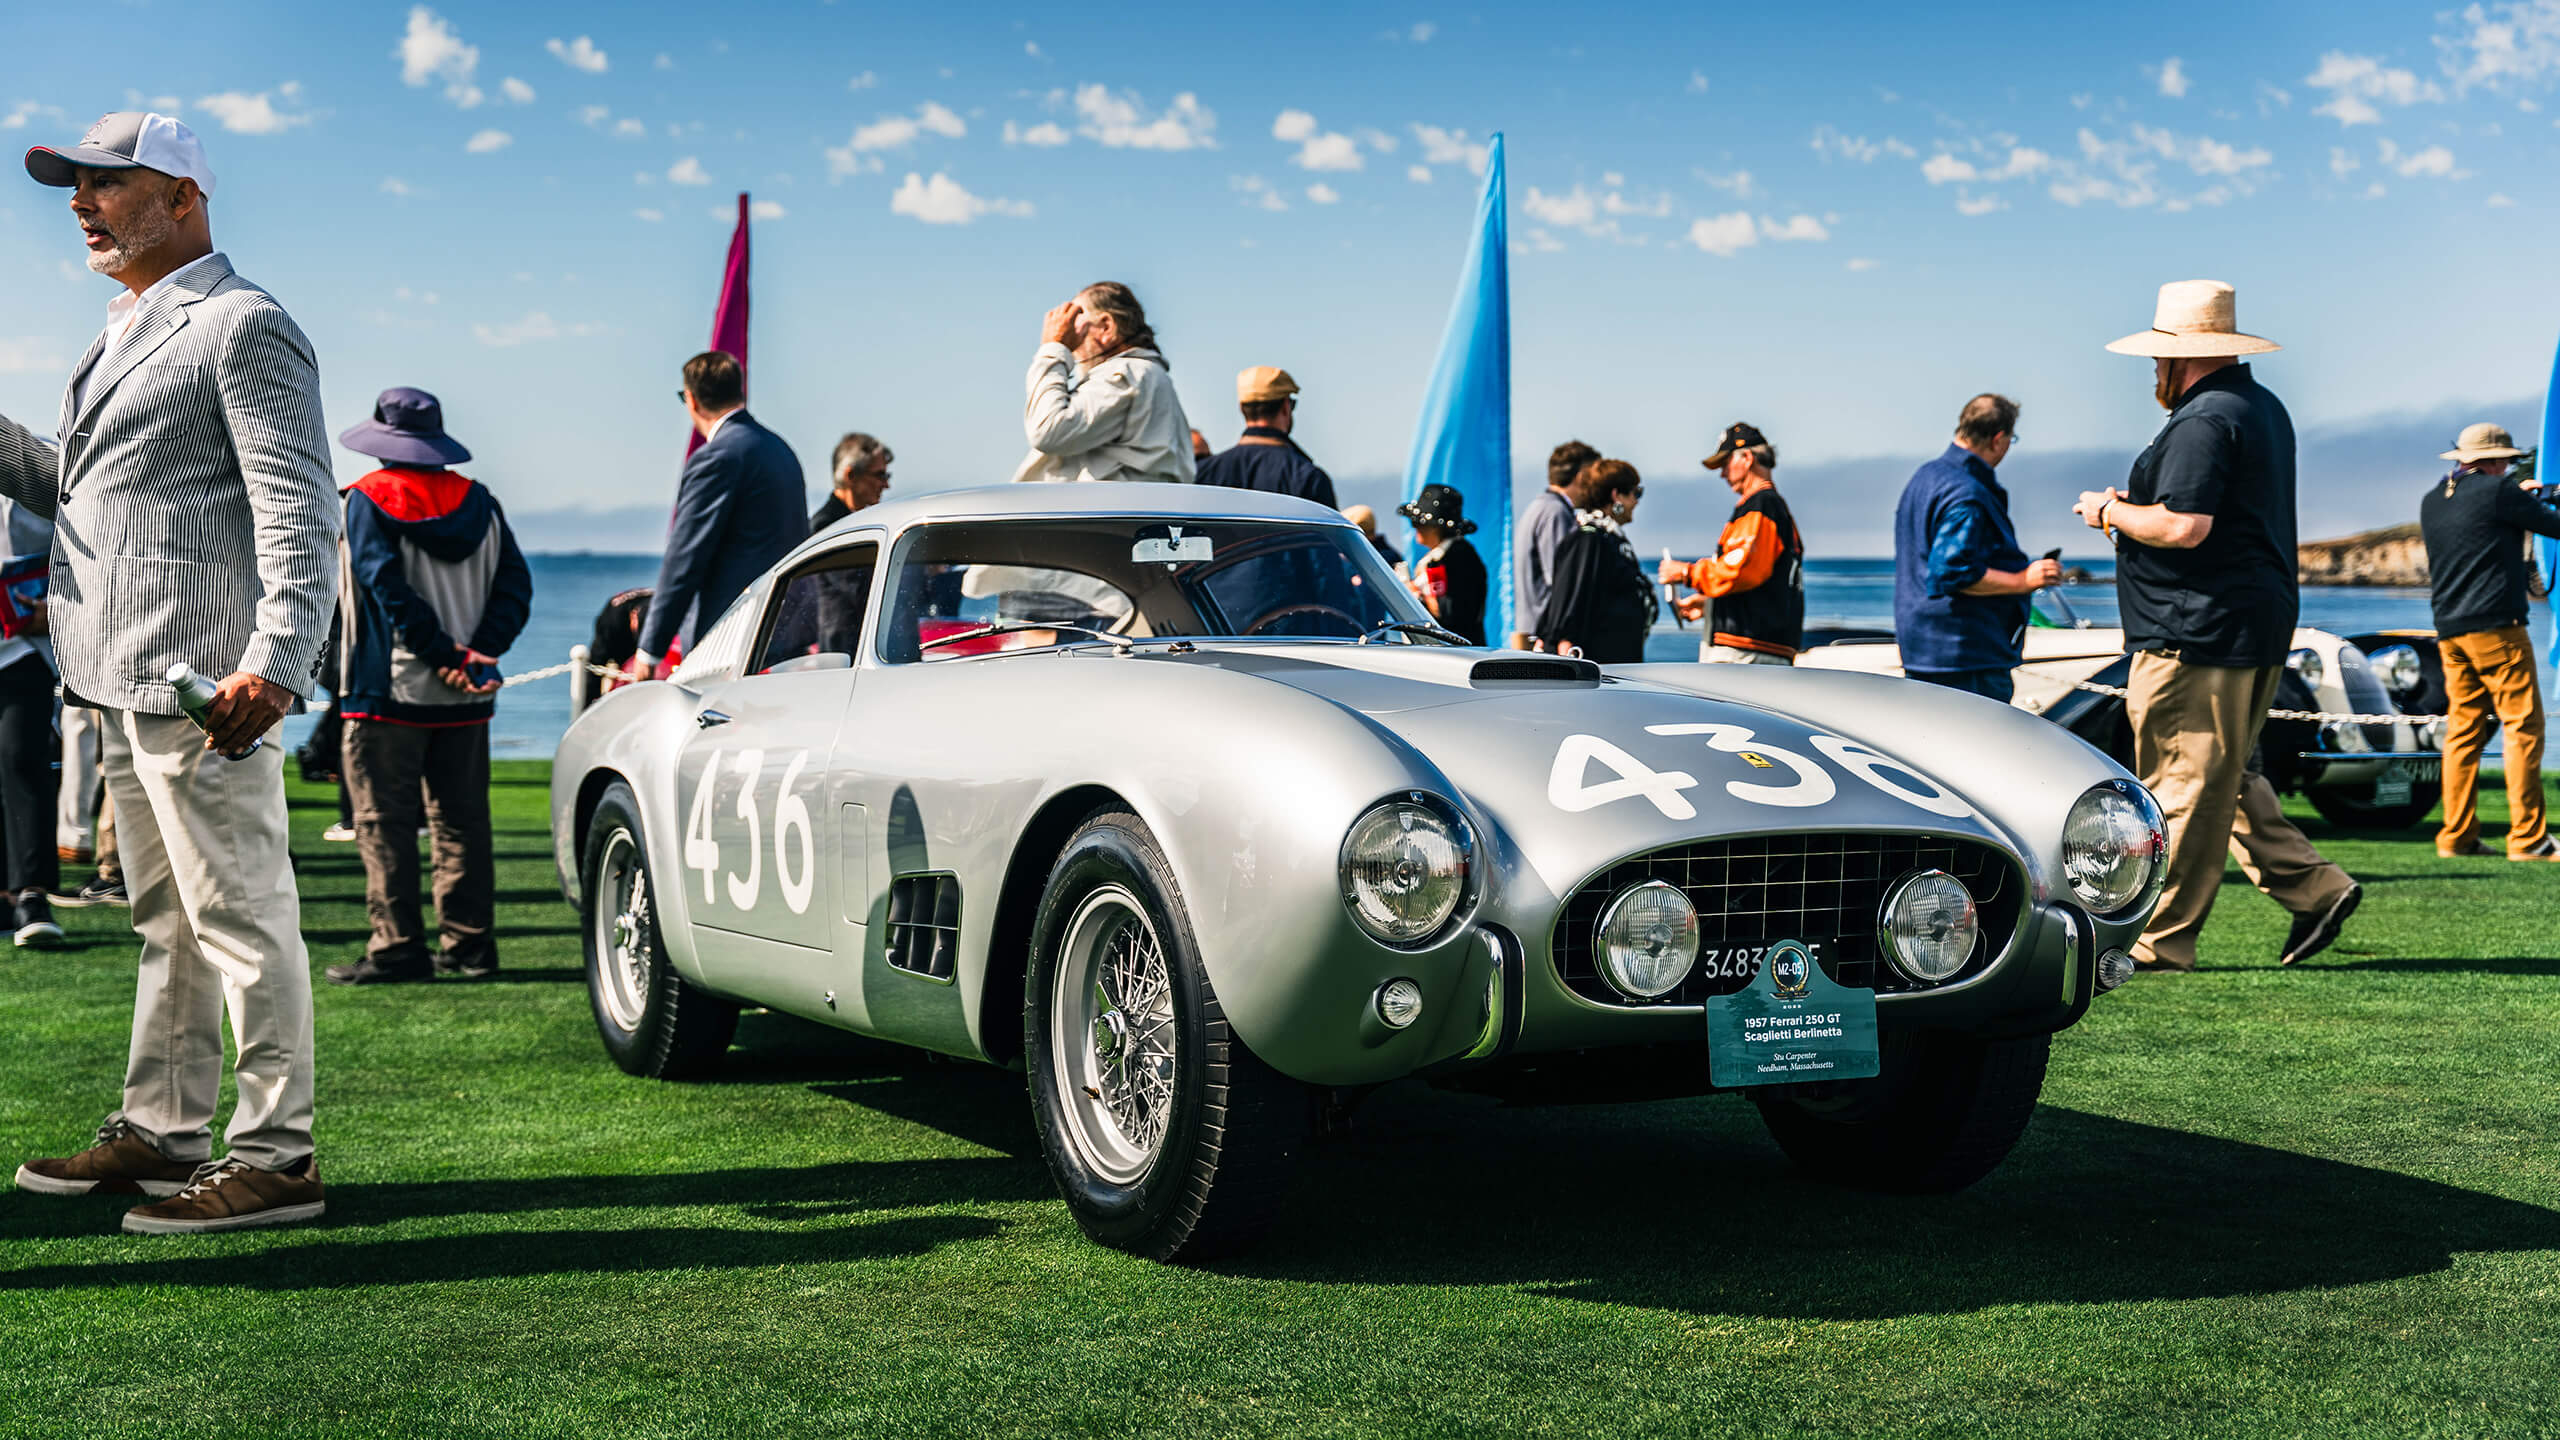 The 2023 Pebble Beach Concours d’Elegance photo gallery